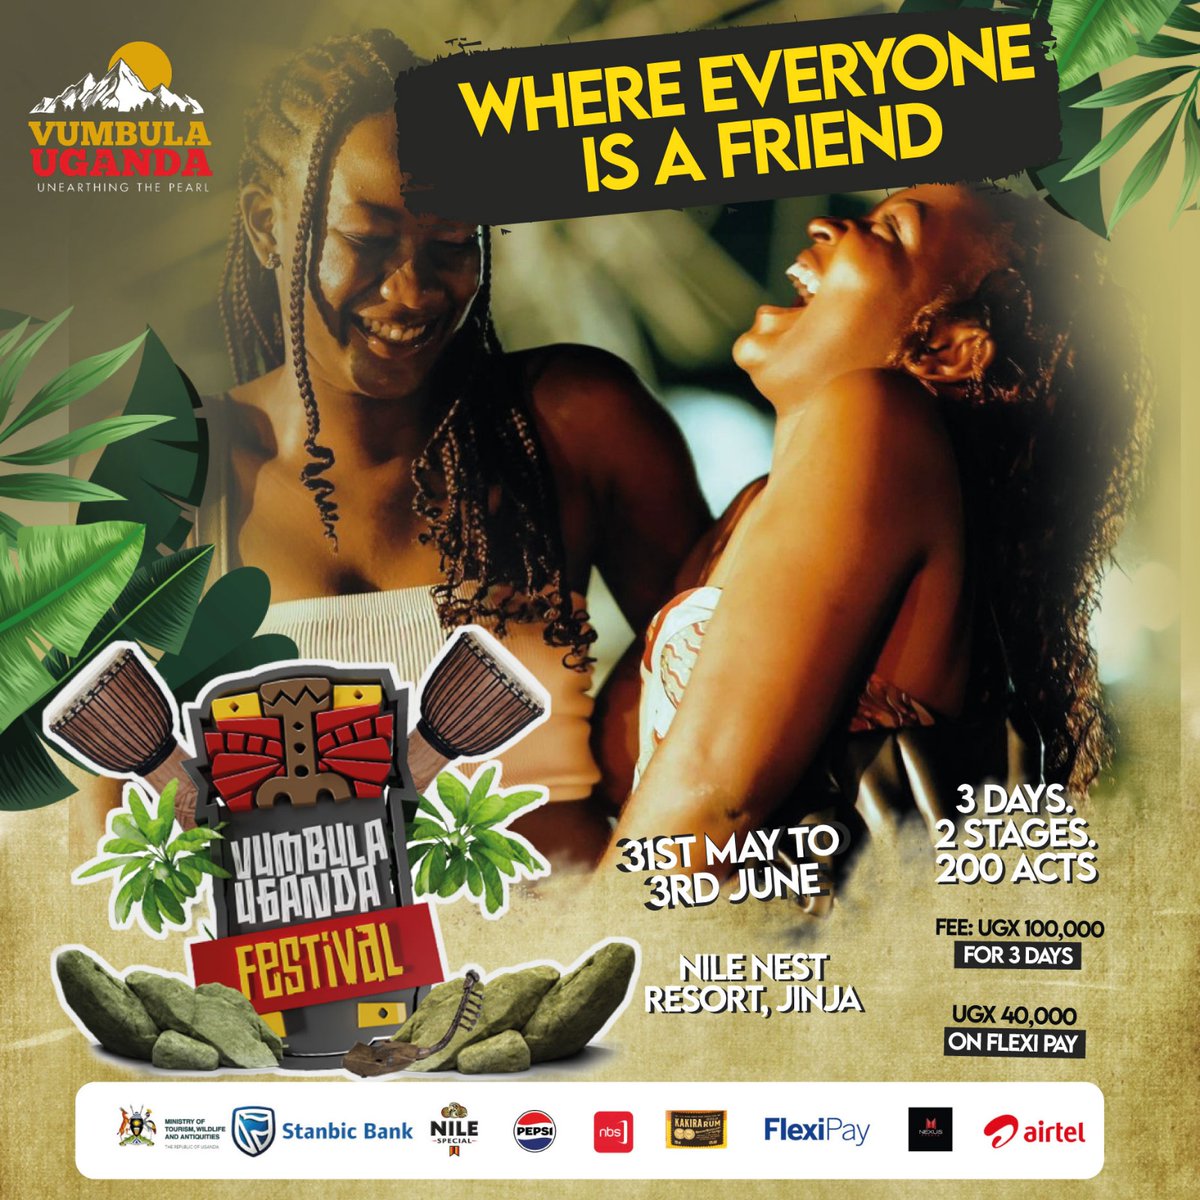 Friends who travel together last forever! Come experience a place where everyone is a friend at #VumbulaUgandaFestival, happening from May 31st to June 3rd at Nile Nest Resort, Jinja! @Vumbula_Uganda #SanyukaUpdates